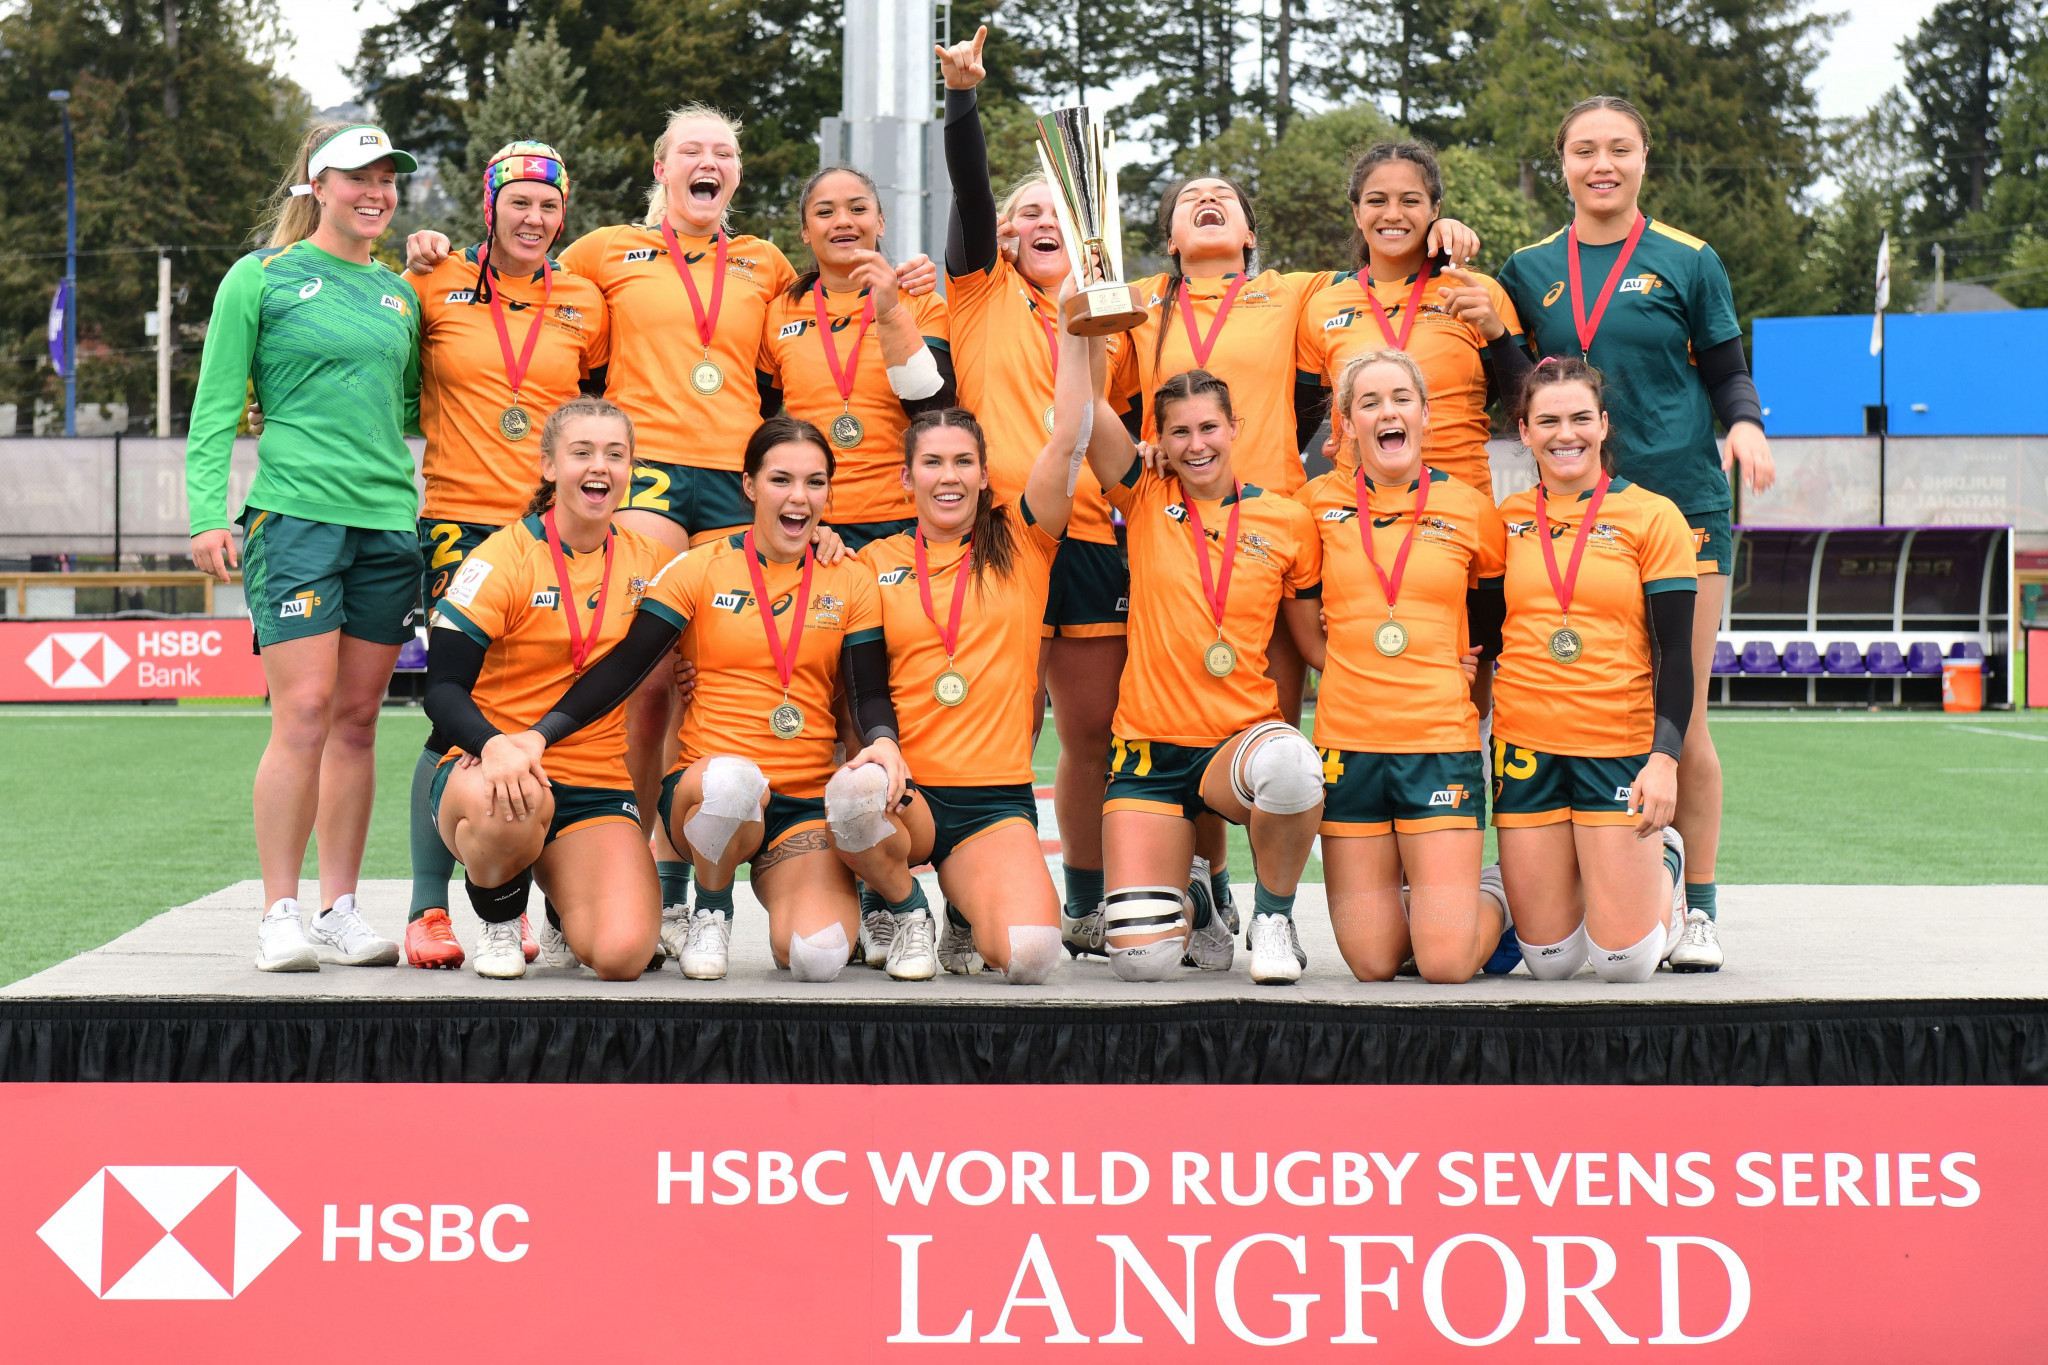 Australia triumph in Langford to clinch World Rugby Women's Sevens Series title